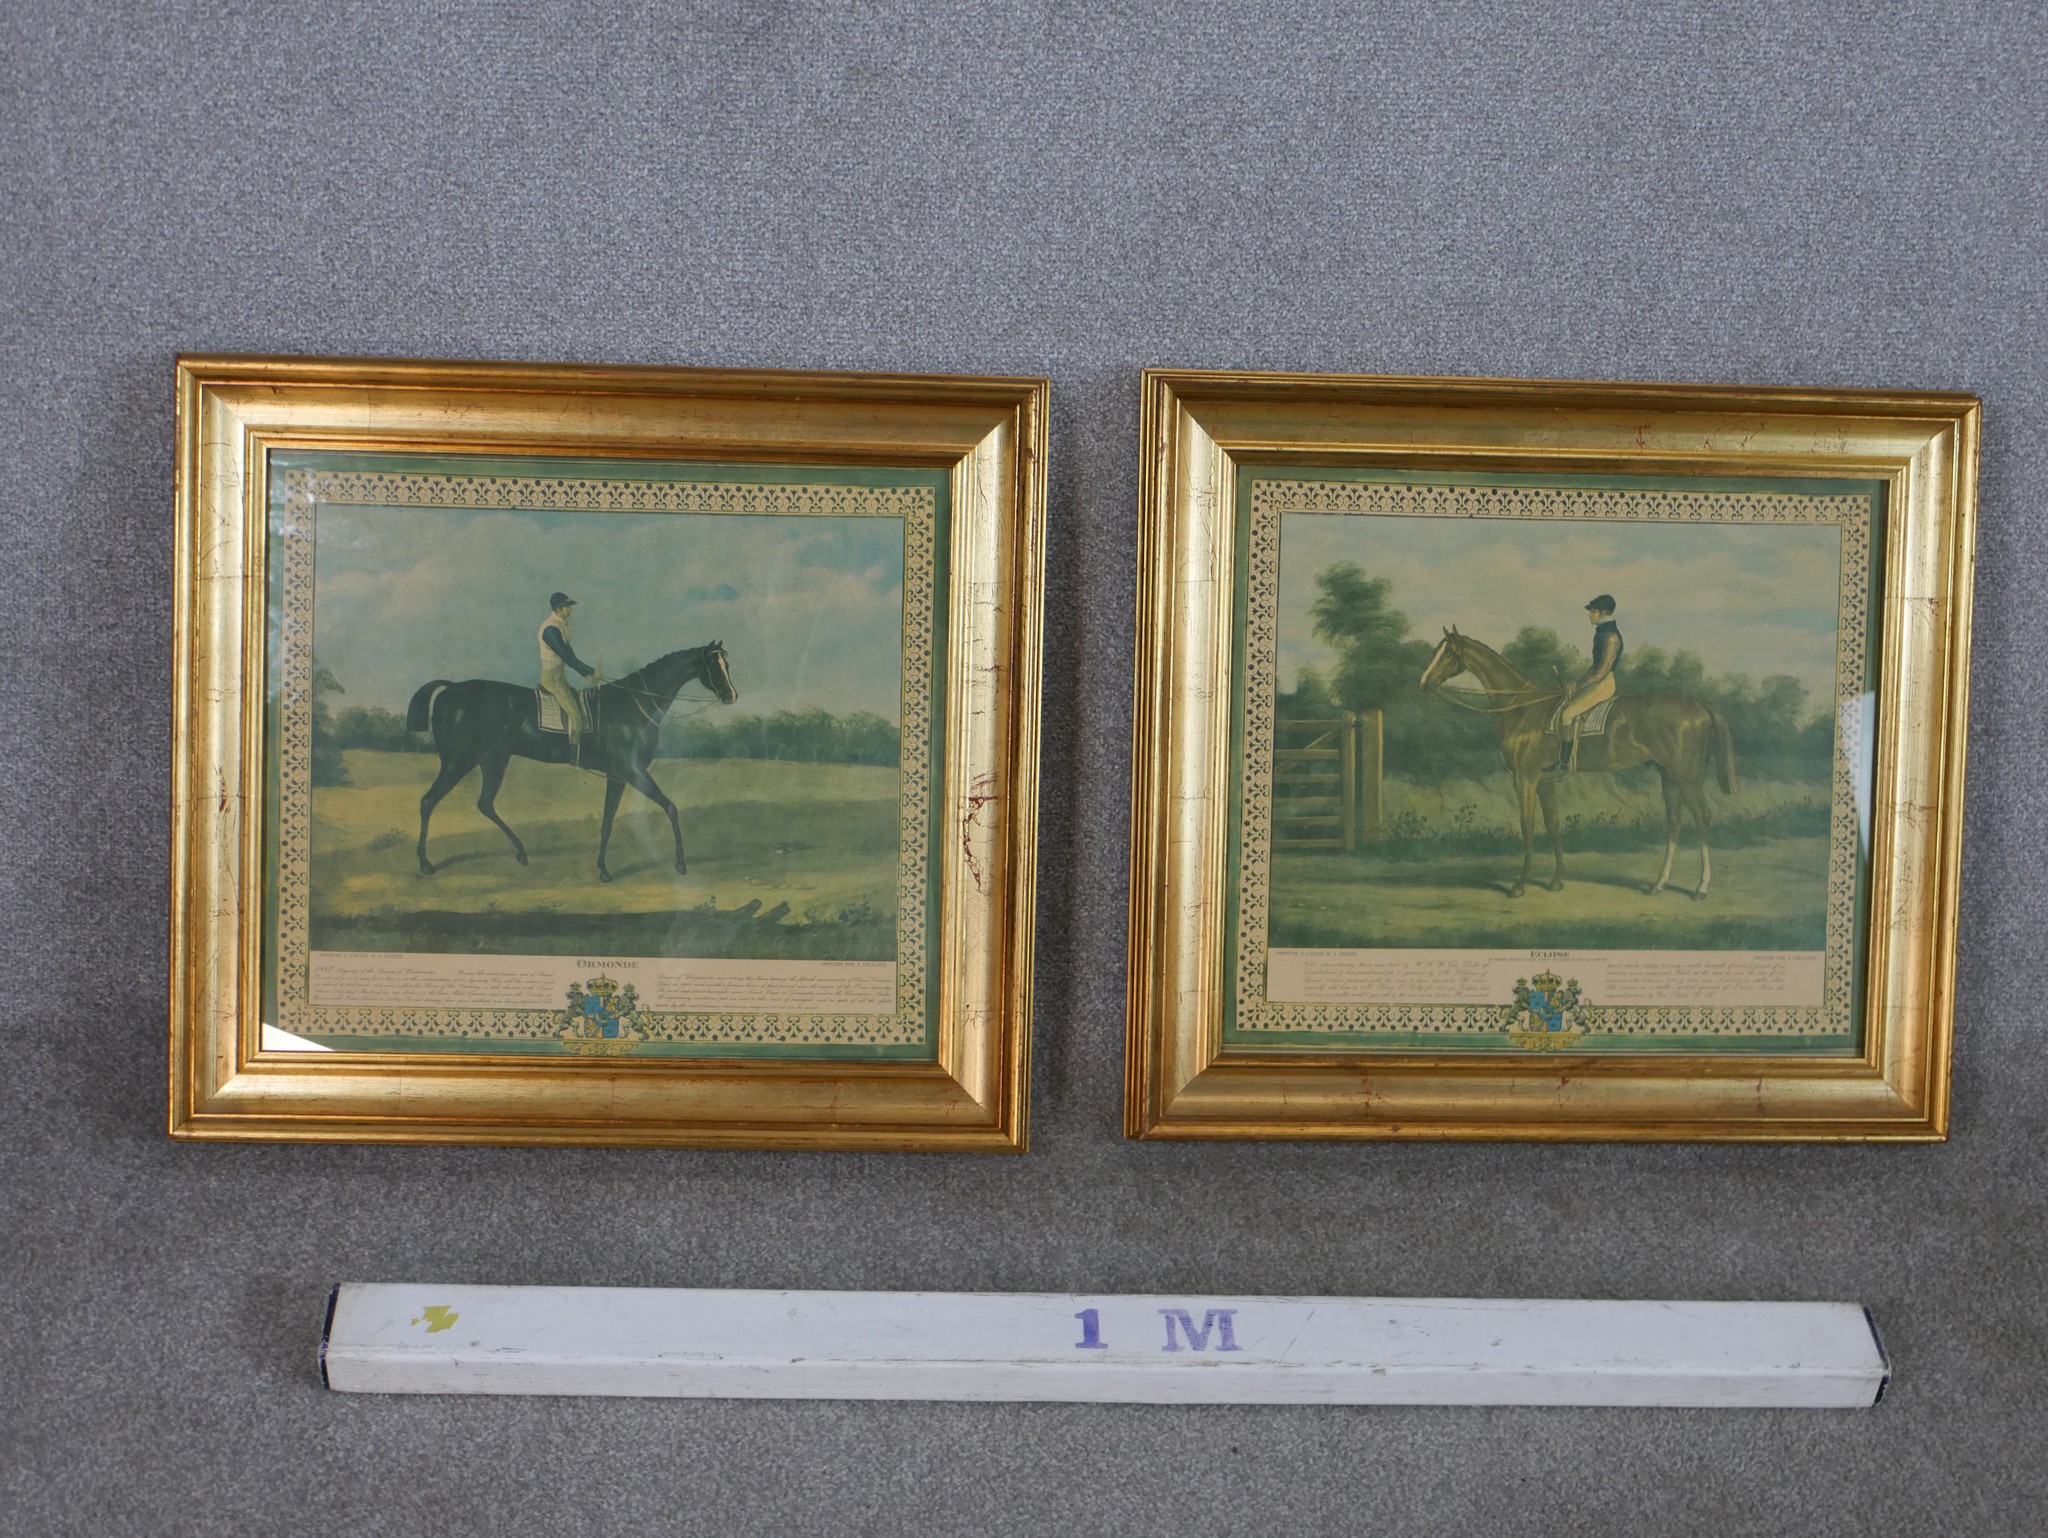 W.J. Shayer (1811 - 1892), two coloured lithographs of famous racing horses 'Ormonde' and 'Eclipse'.